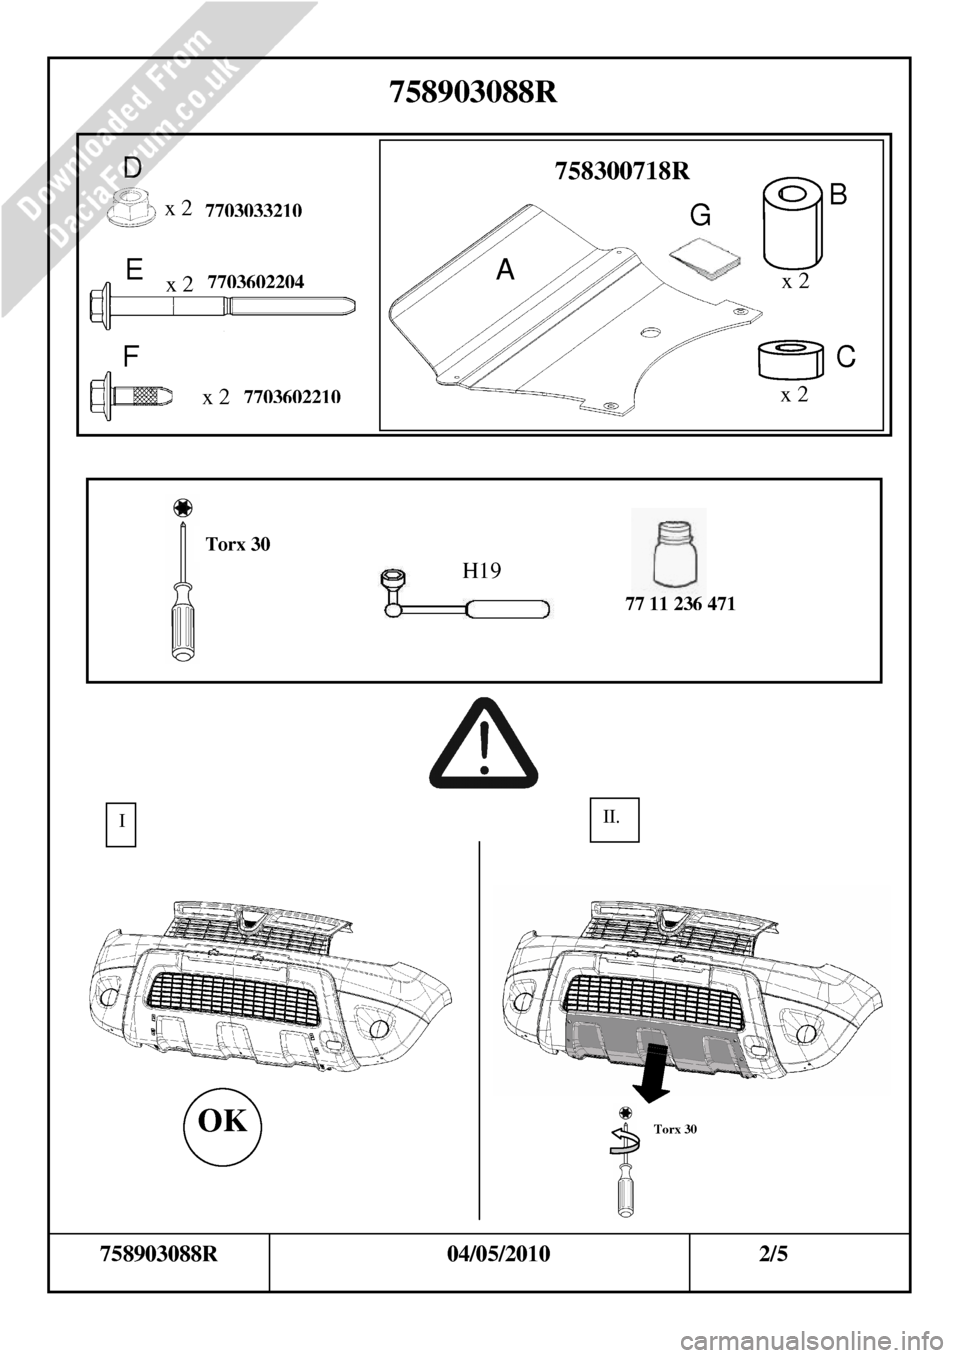 DACIA DUSTER 2010 1.G Front Sump Guard Fitting Guide Workshop Manual      
                    
    
                  
          
        758903088R                                         04/05/2010                                      2/5   
            
758903088R 